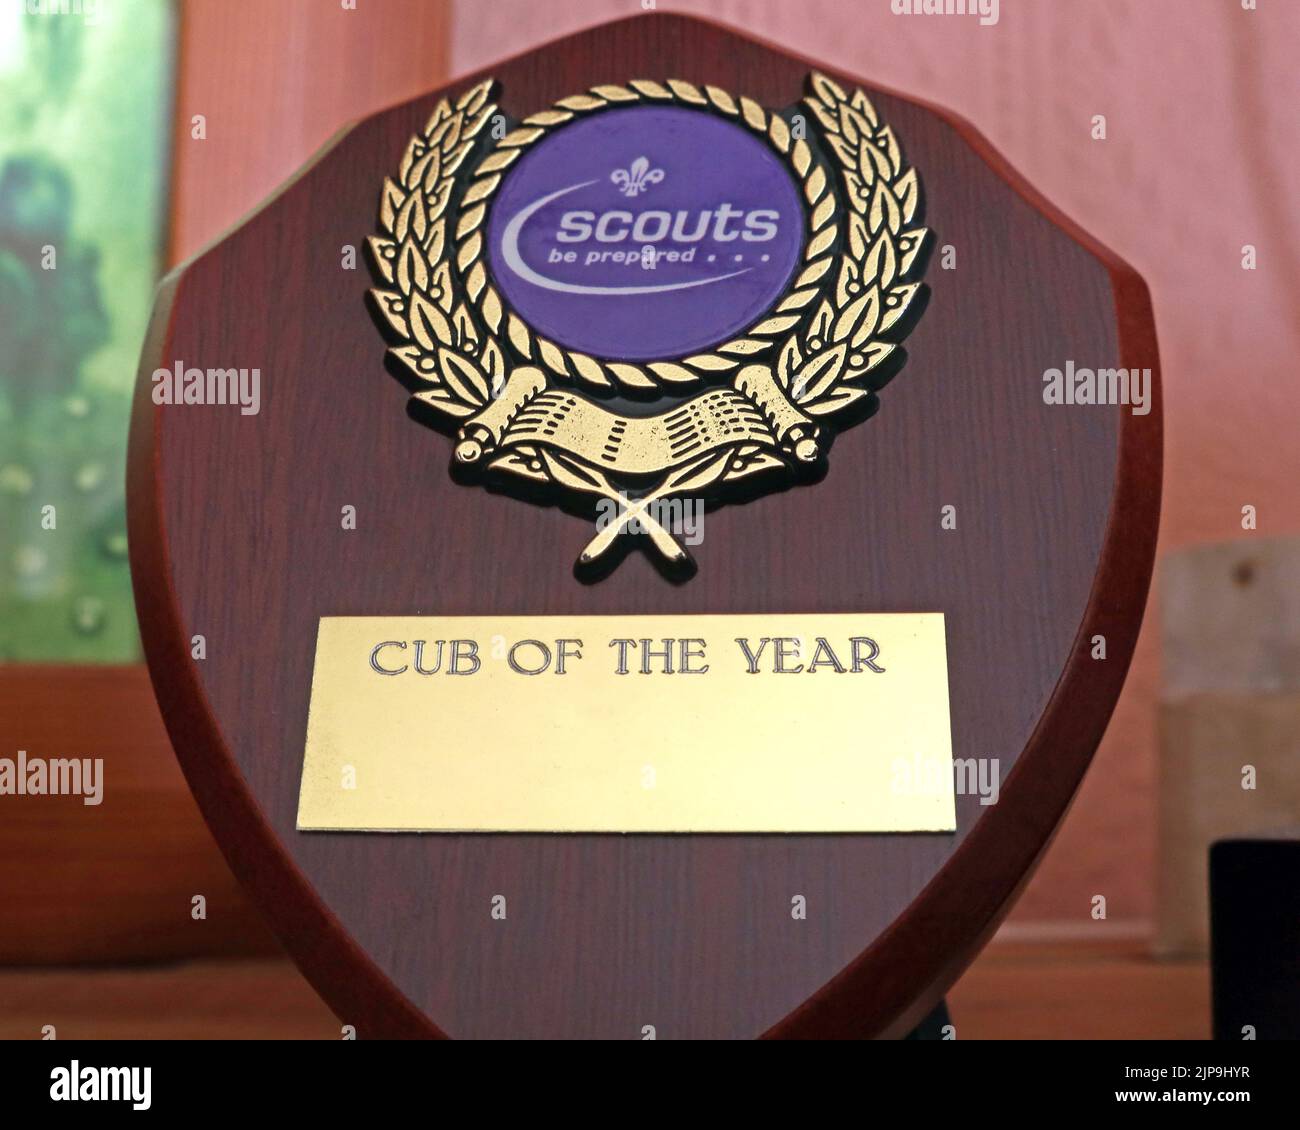 Trofeo Scouts - Cub of the Year - COY Foto Stock